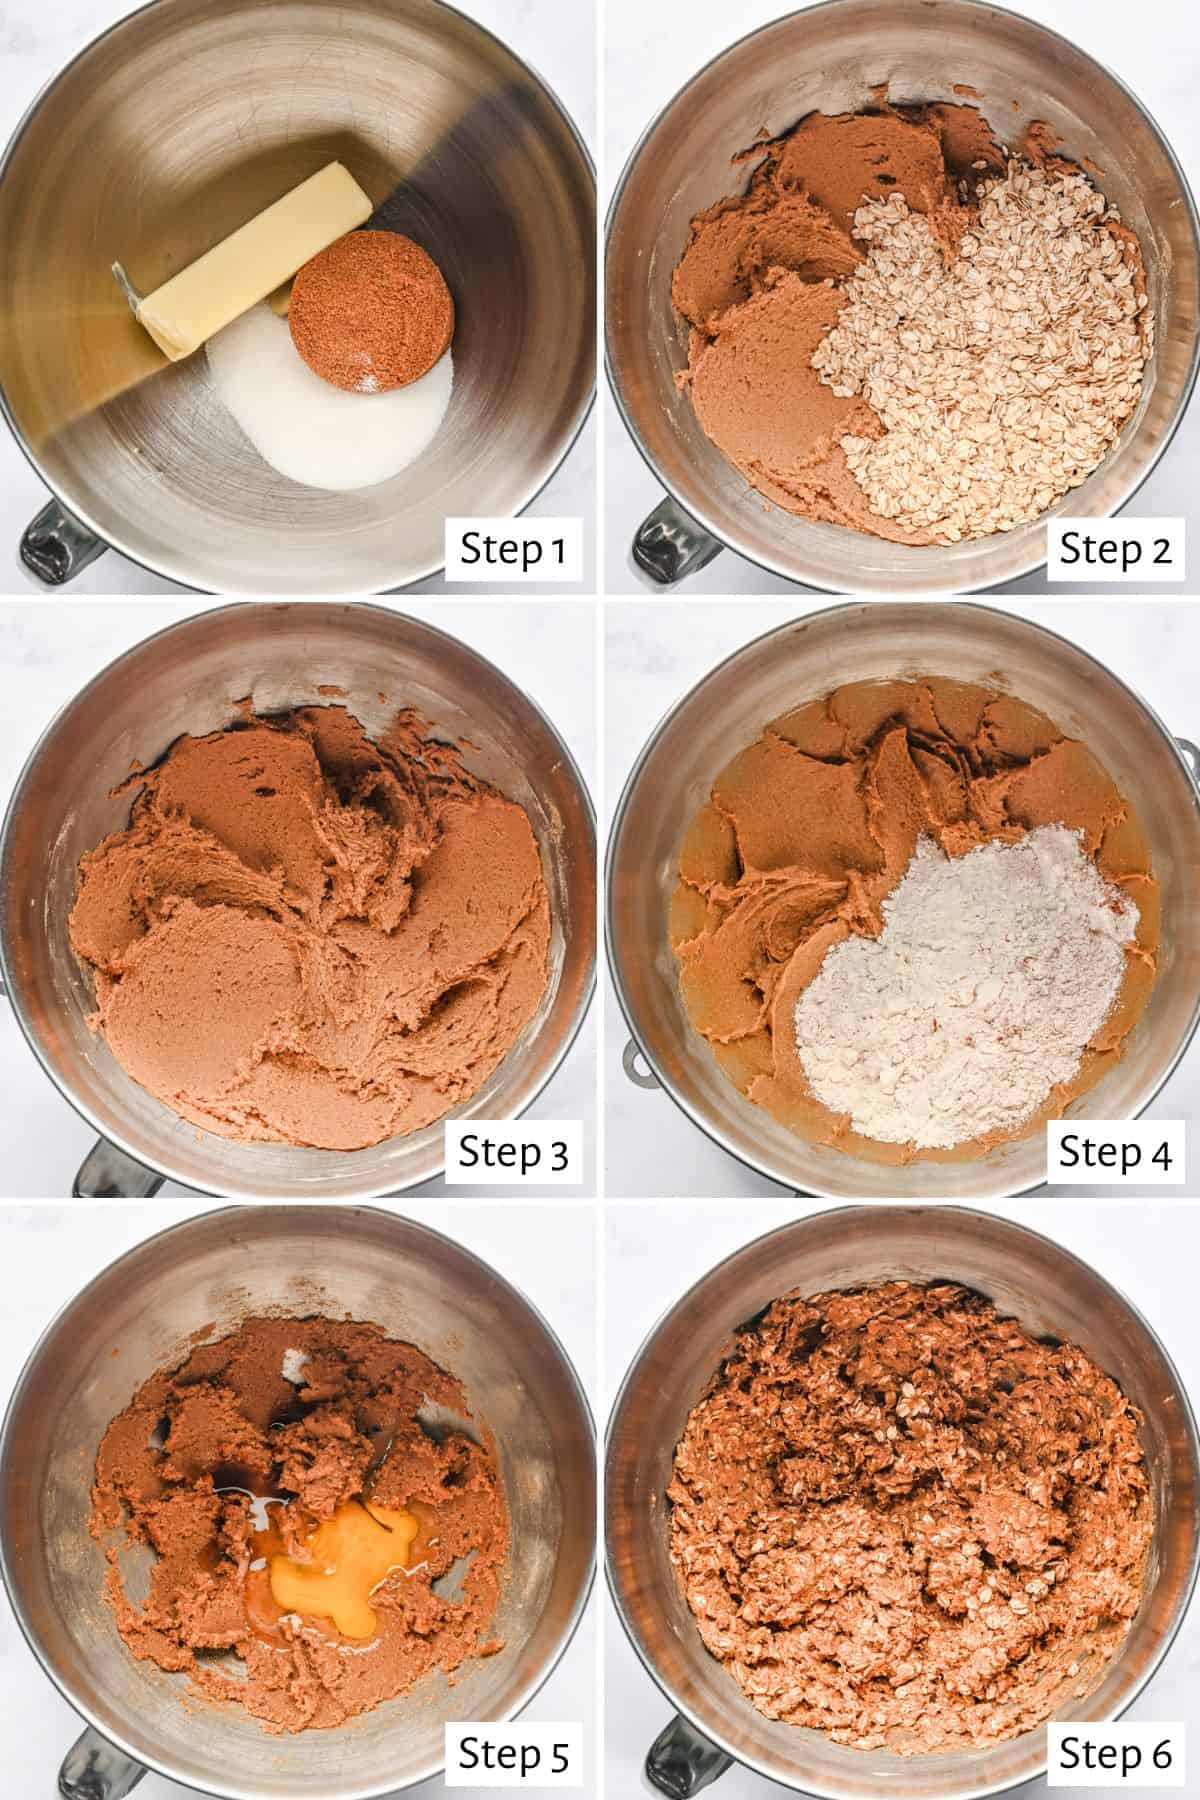 6 image collage making recipe: 1- butter and sugar in the bowl of a stand mixer before creaming, 2- after creaming with an egg and vanilla added, 3- after mixing with the dry ingredients added, 4- after flour combined into dough, 5- oats added, 6- after dough and oats are folded together.